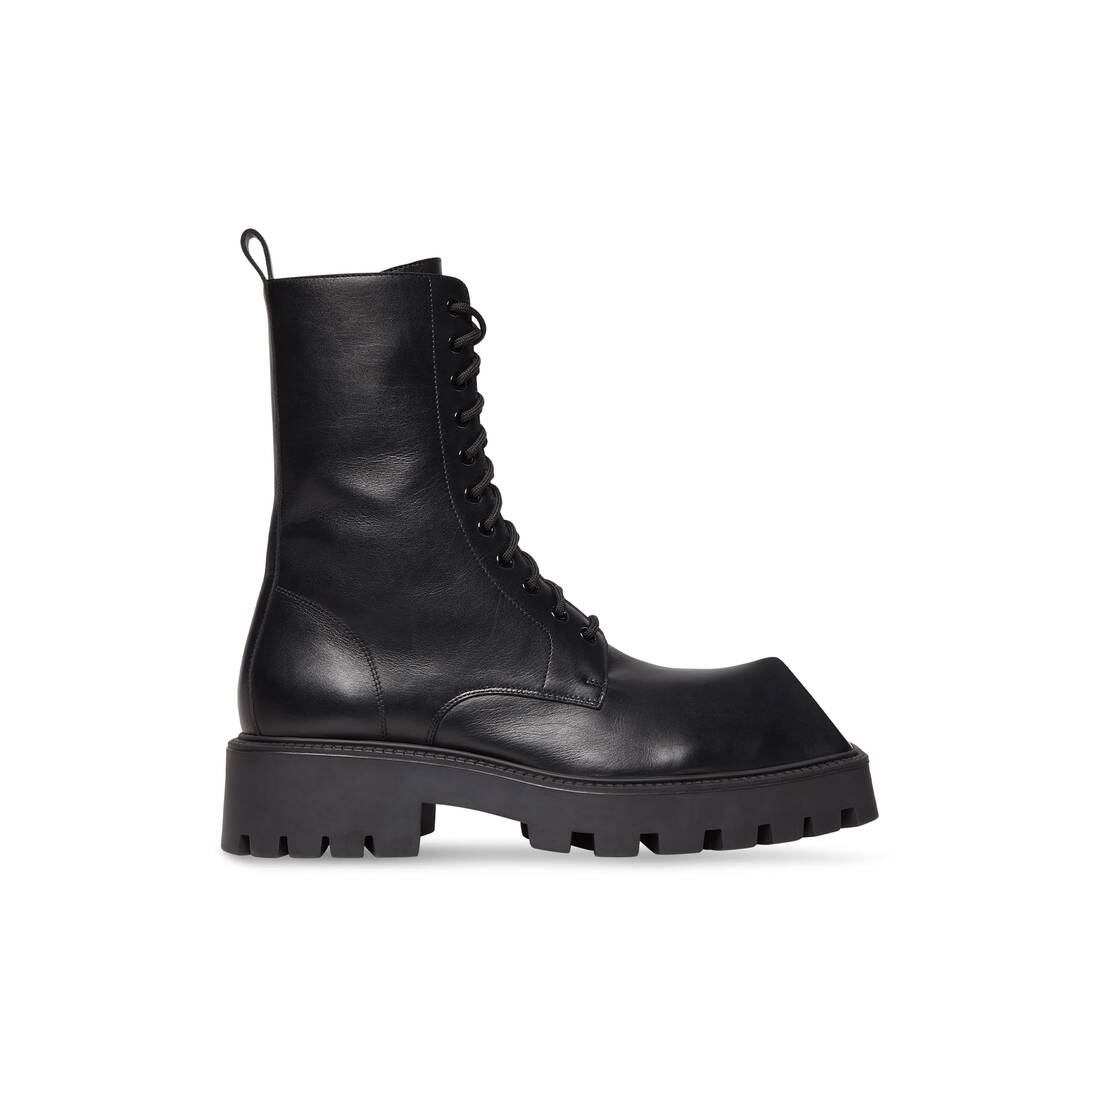 Men's Rhino 25mm Lace-up Boot  in Black - 1